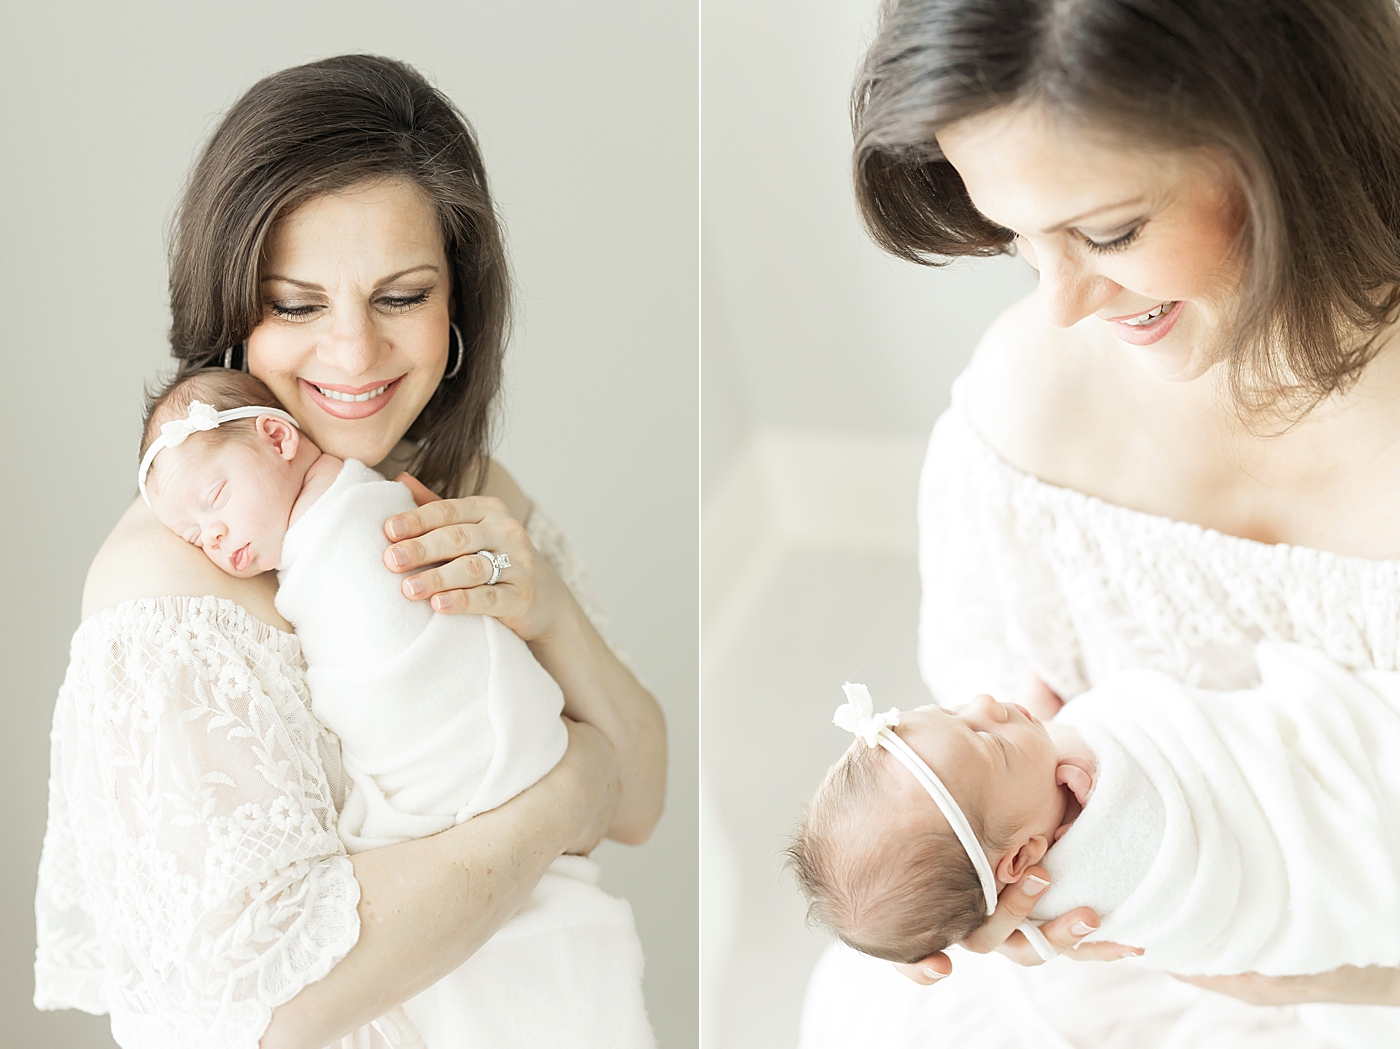 Mom and her beautiful baby girl. Photos by Fresh Light Photography.